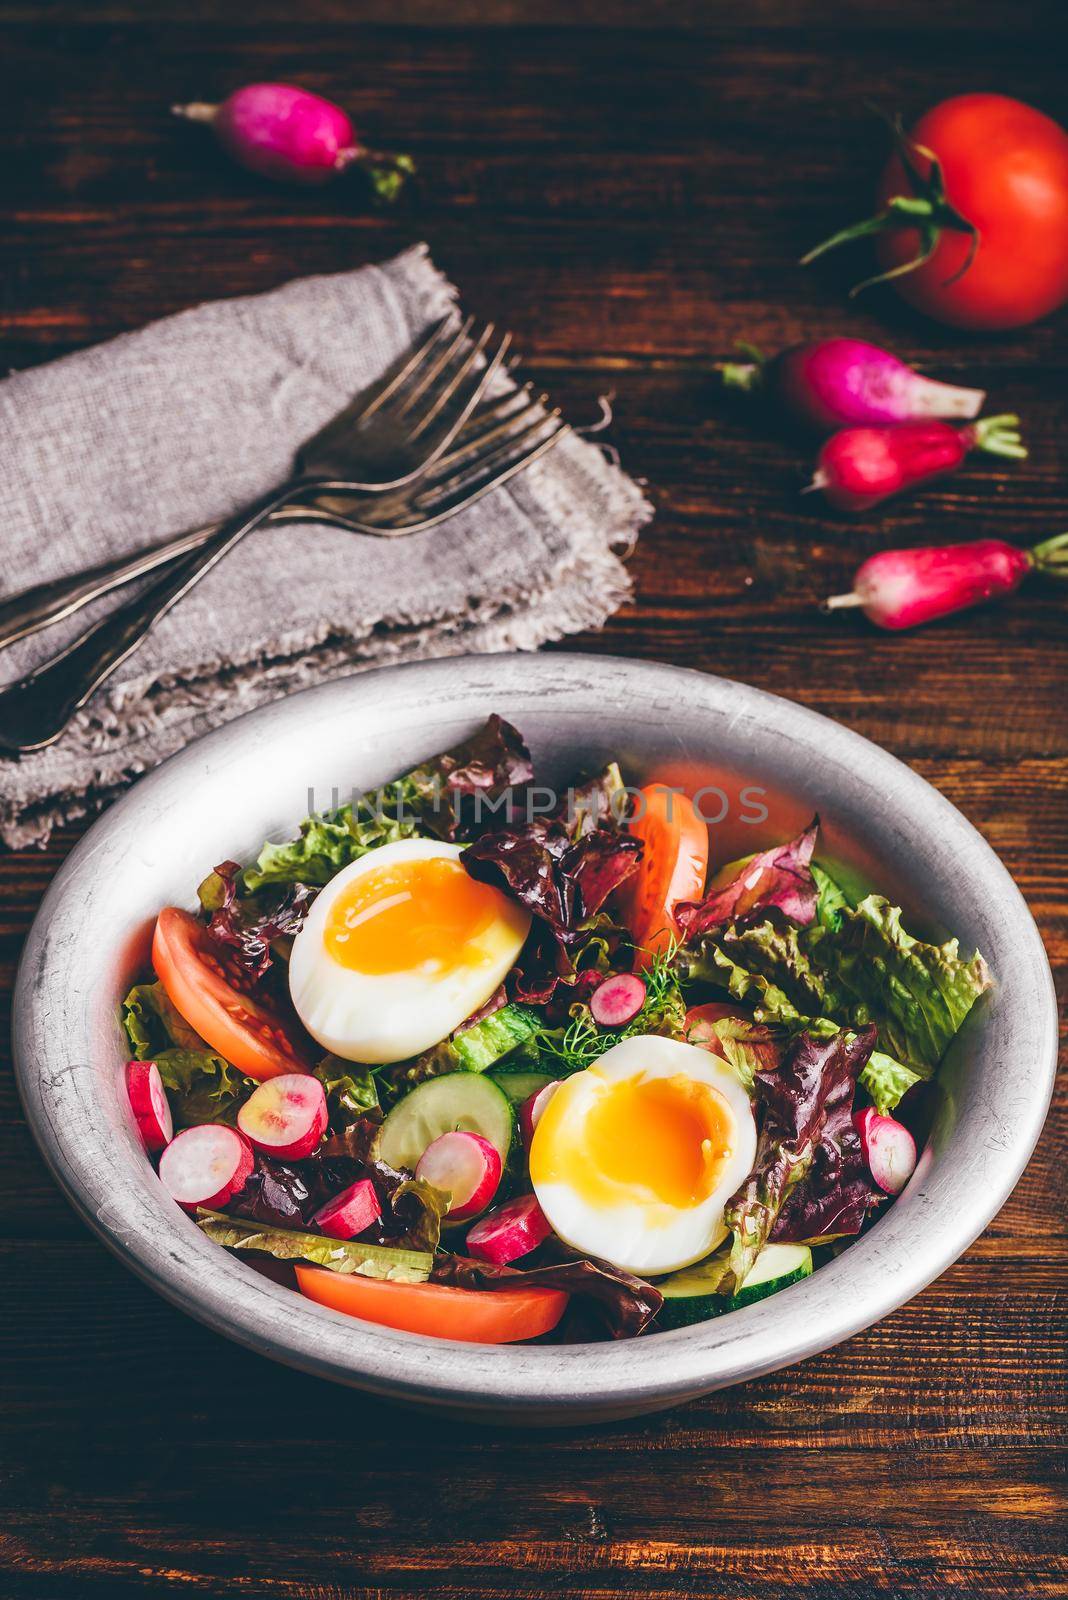 Fresh spring salad with tomato, radish, cucumber, red leaf lettuce and boiled eggs in metal bowl